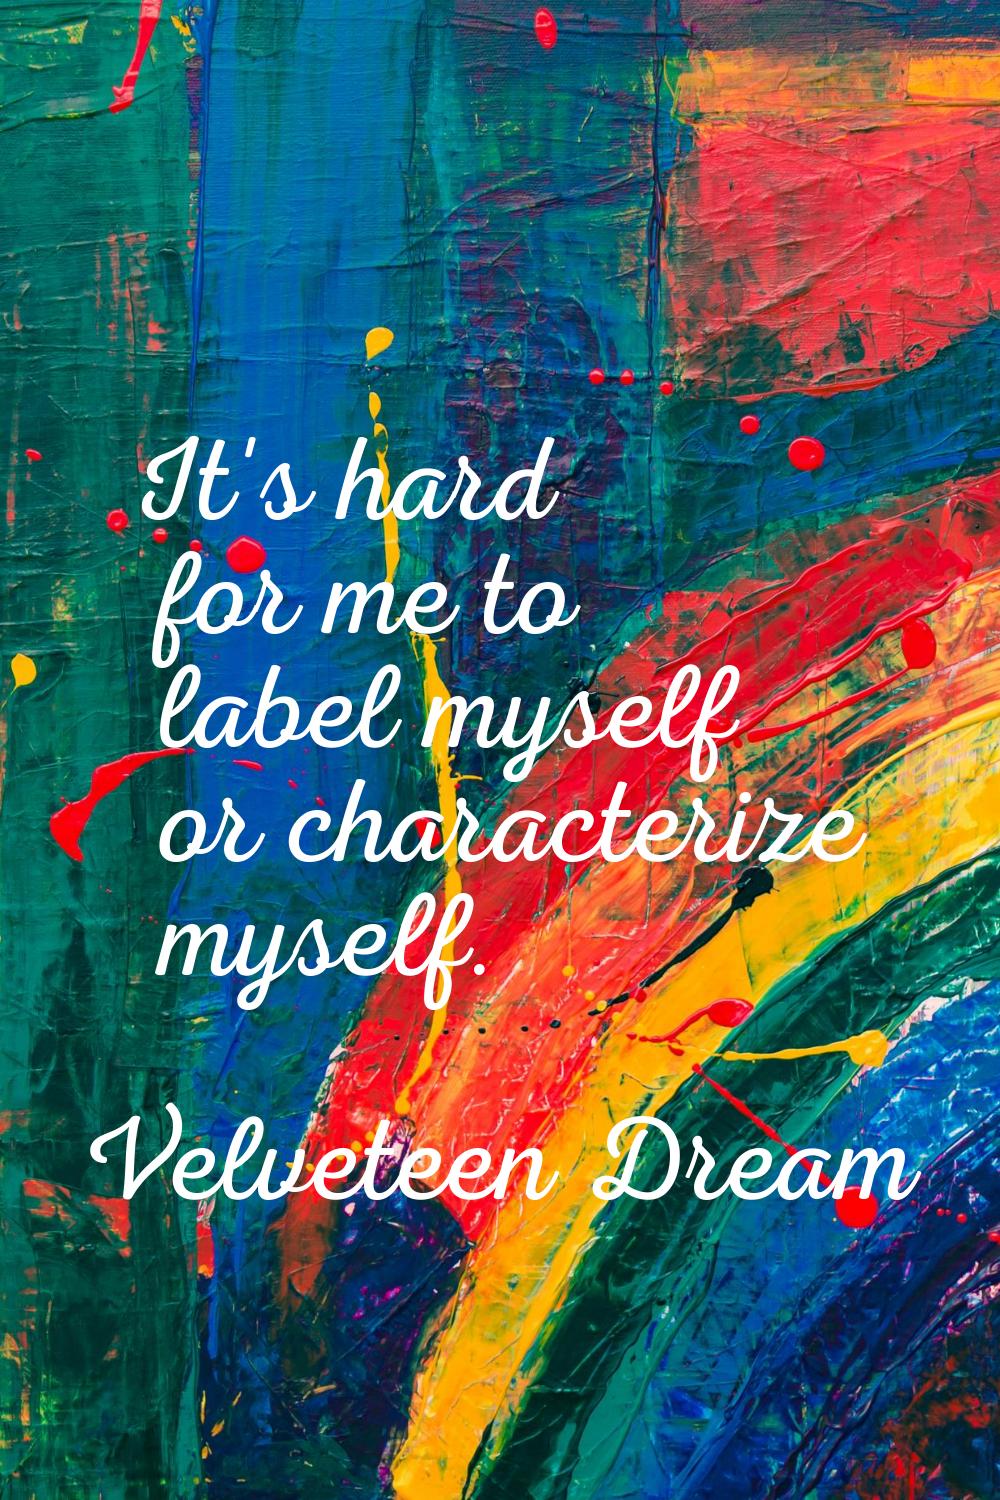 It's hard for me to label myself or characterize myself.